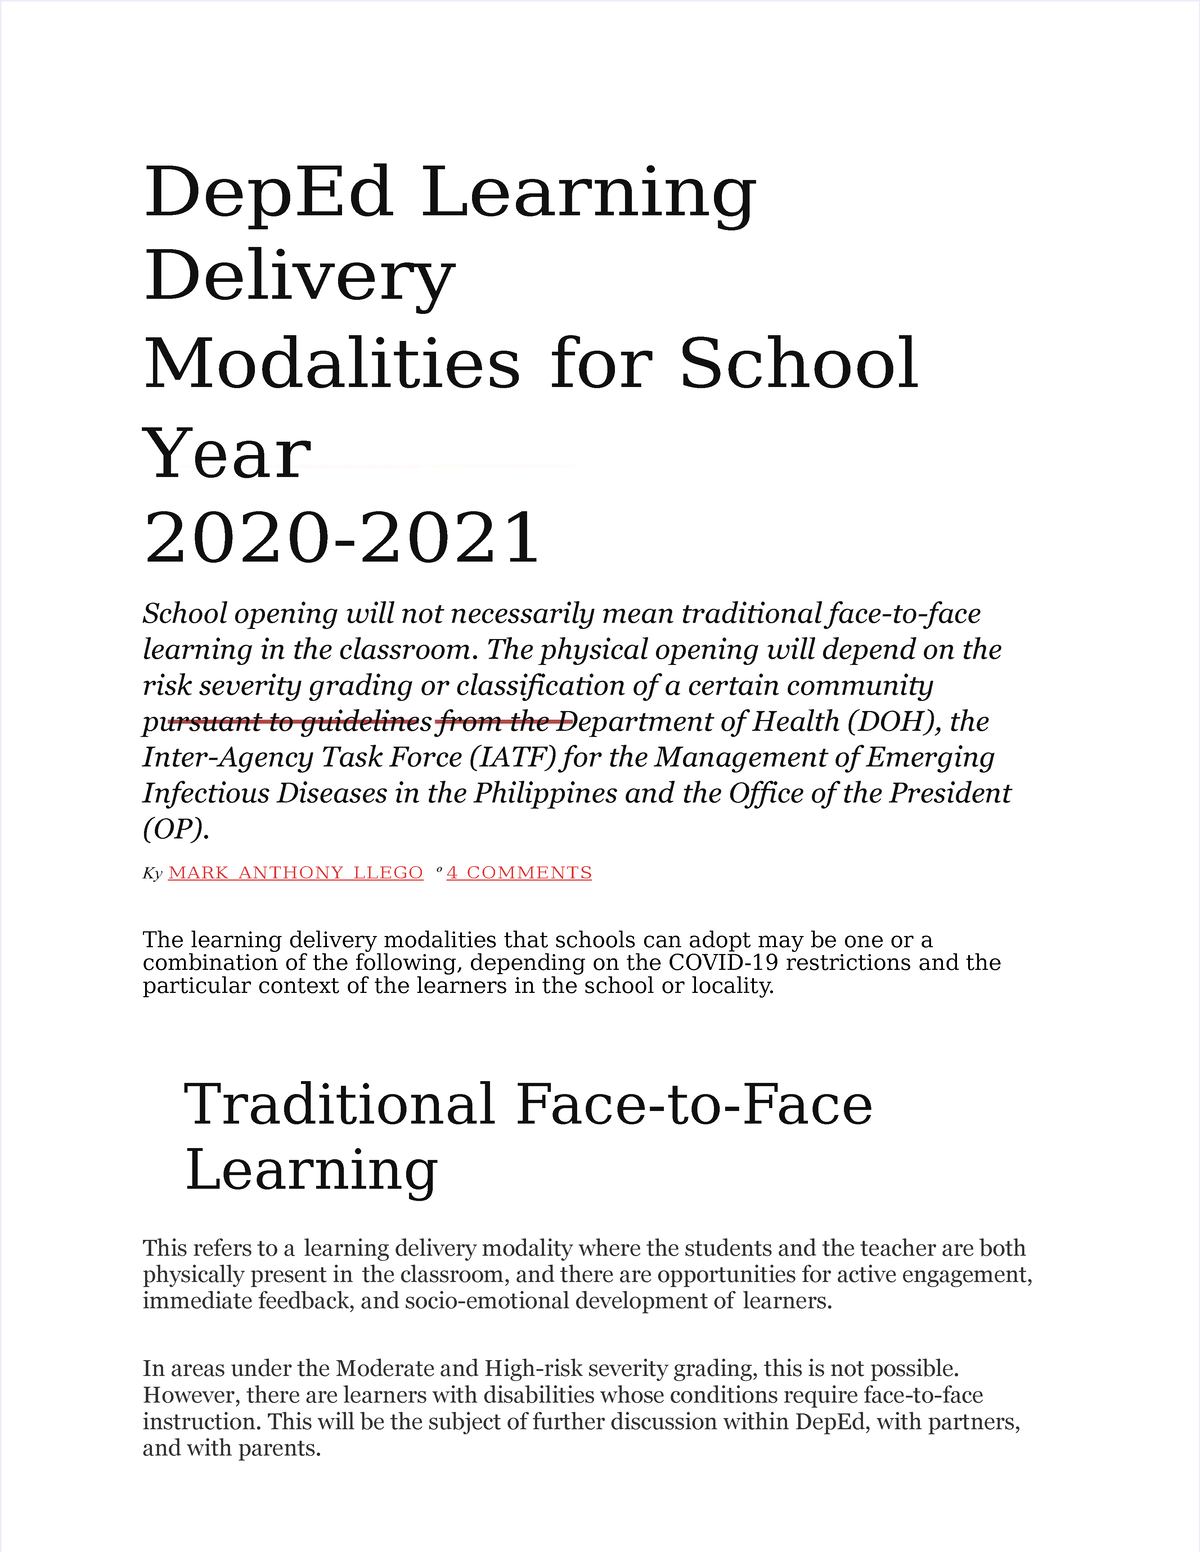 Deped Learning Delivery Modalities 2020 Youtube Gamba 0847